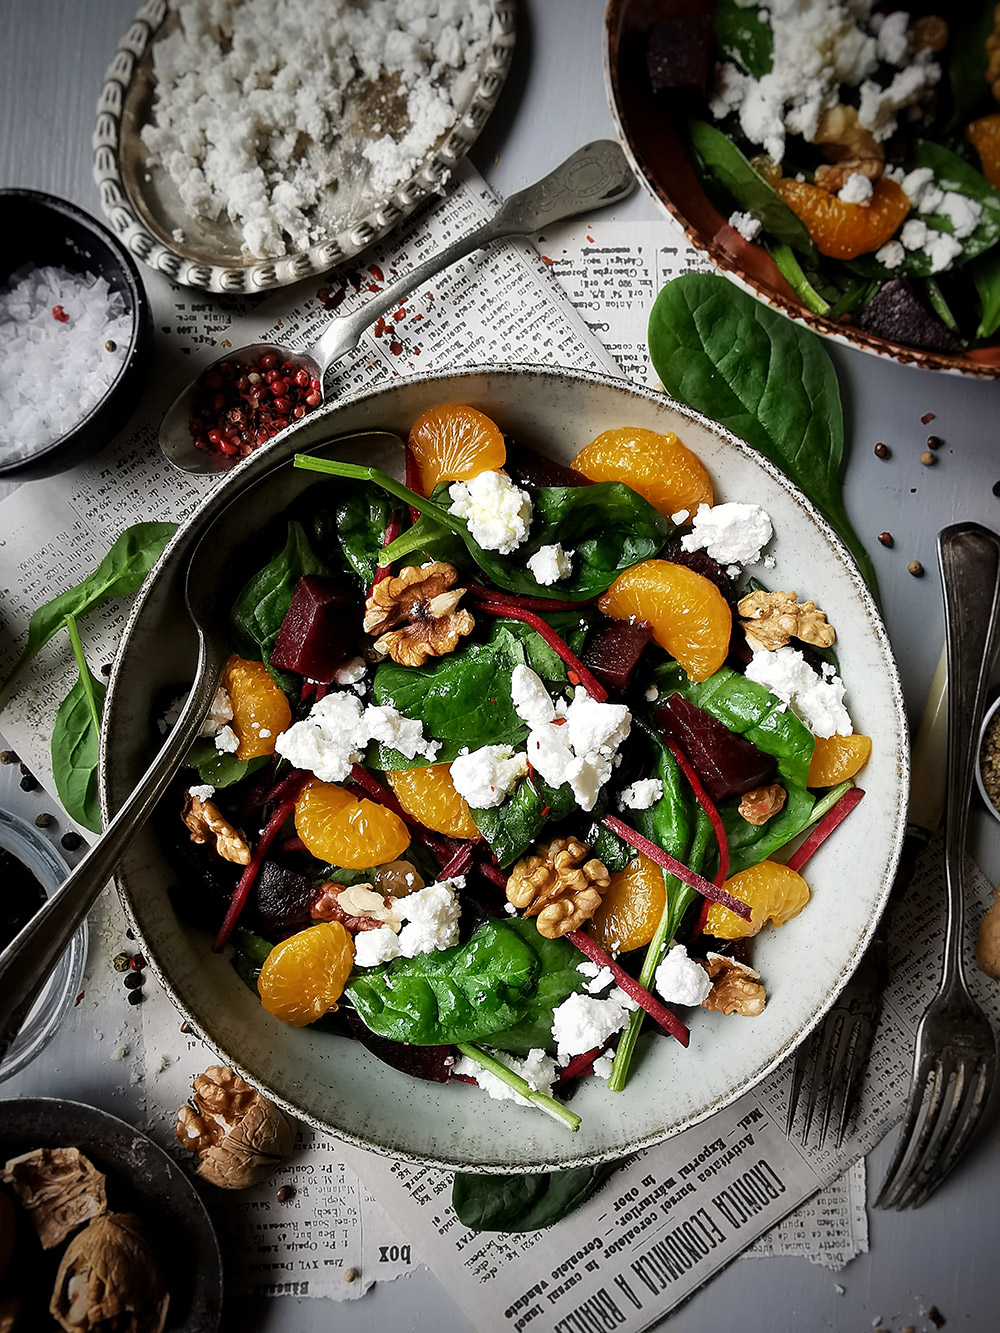 Spinach, goat cheese and tangerine salad